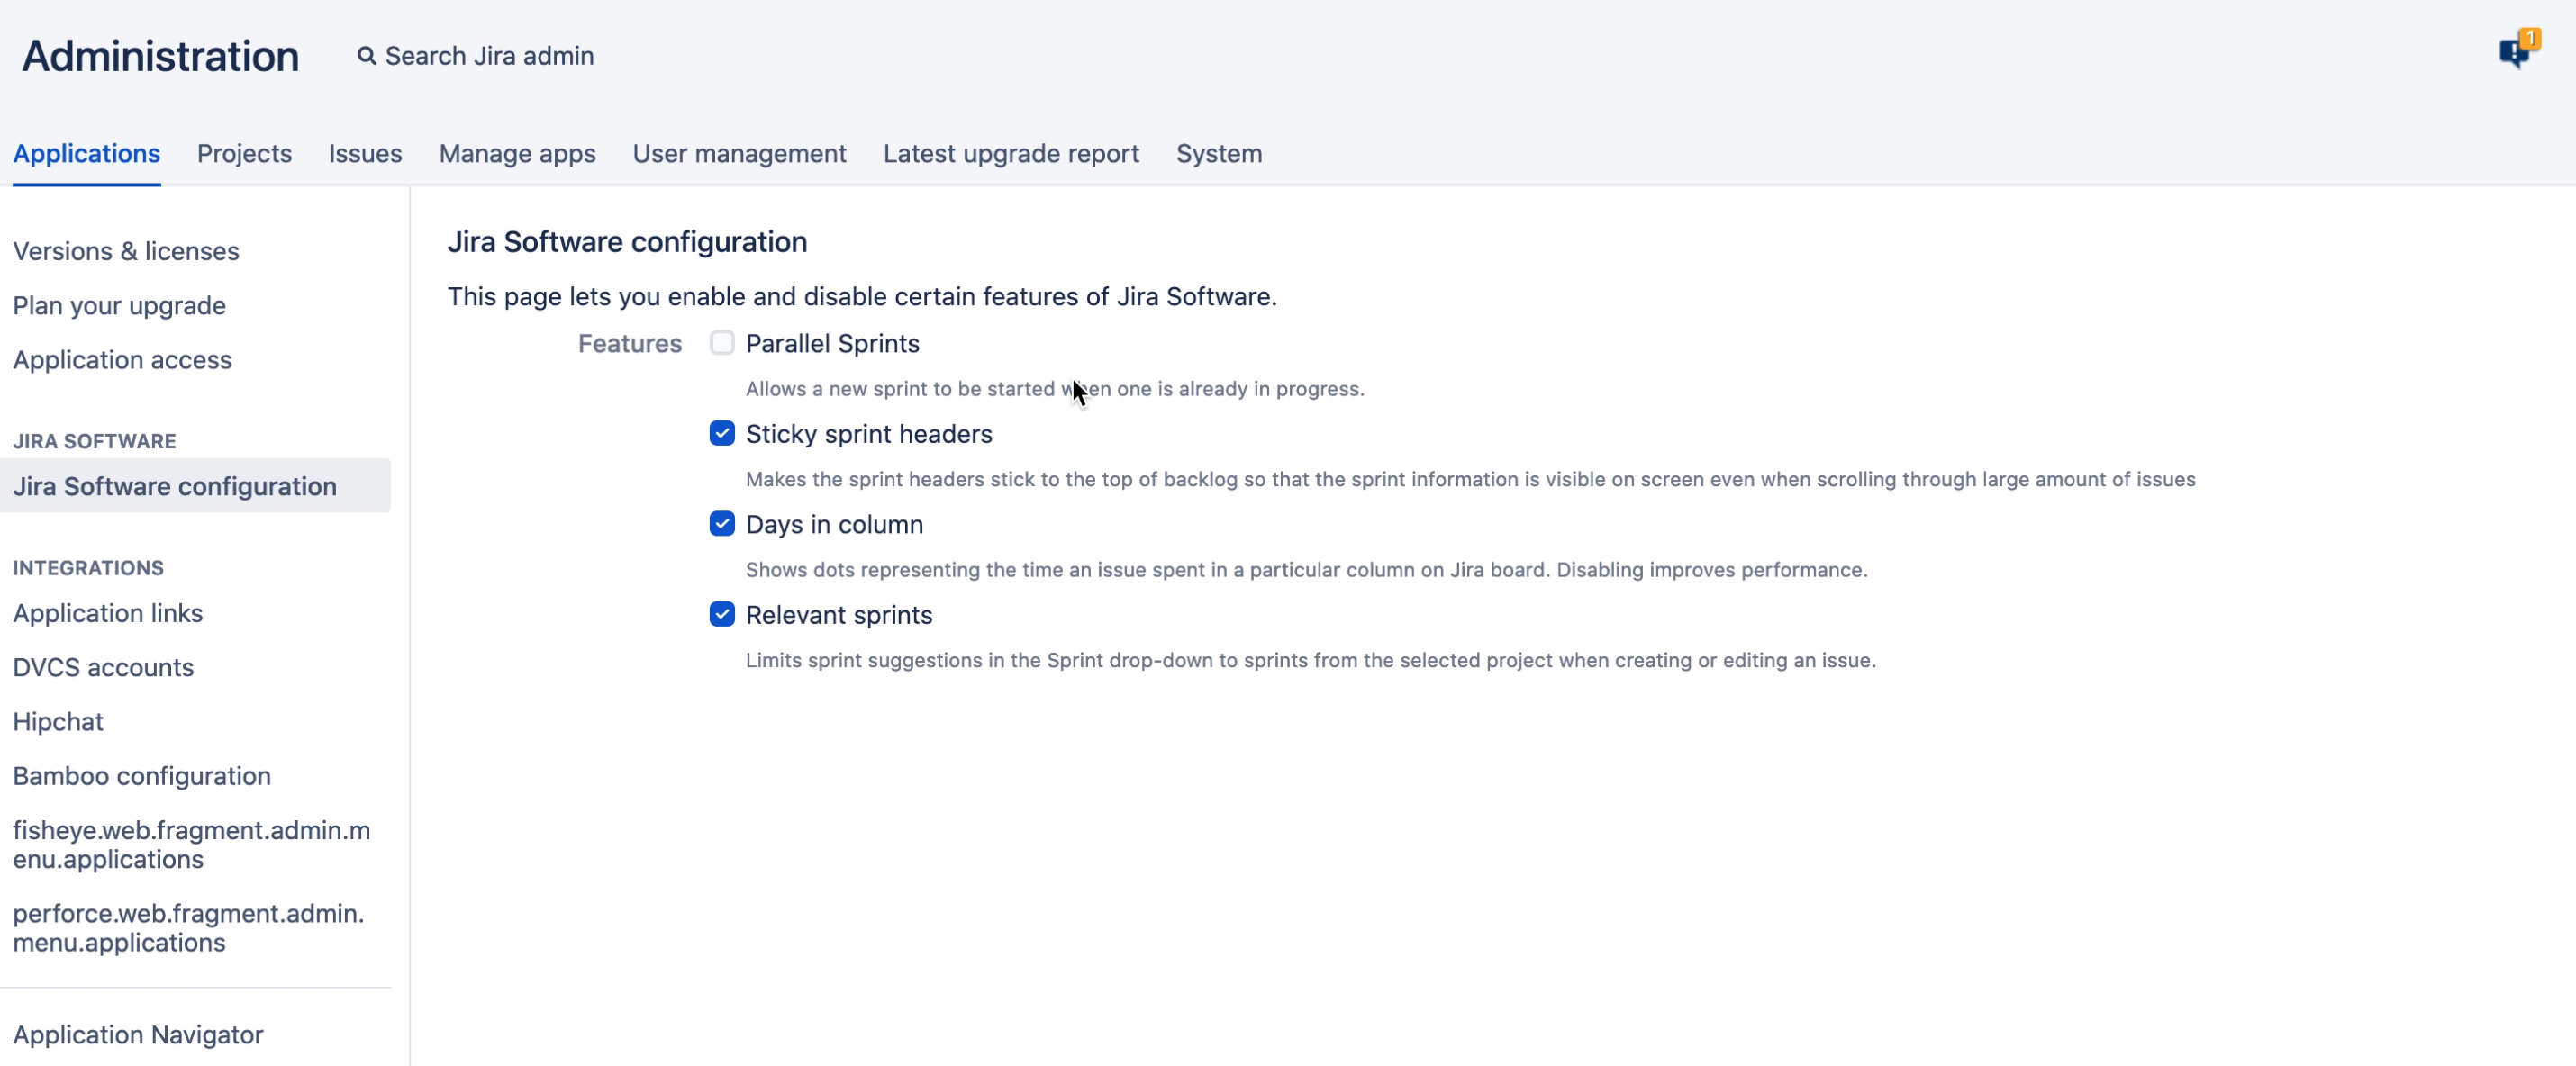 Jira Software configuration in the administration console.